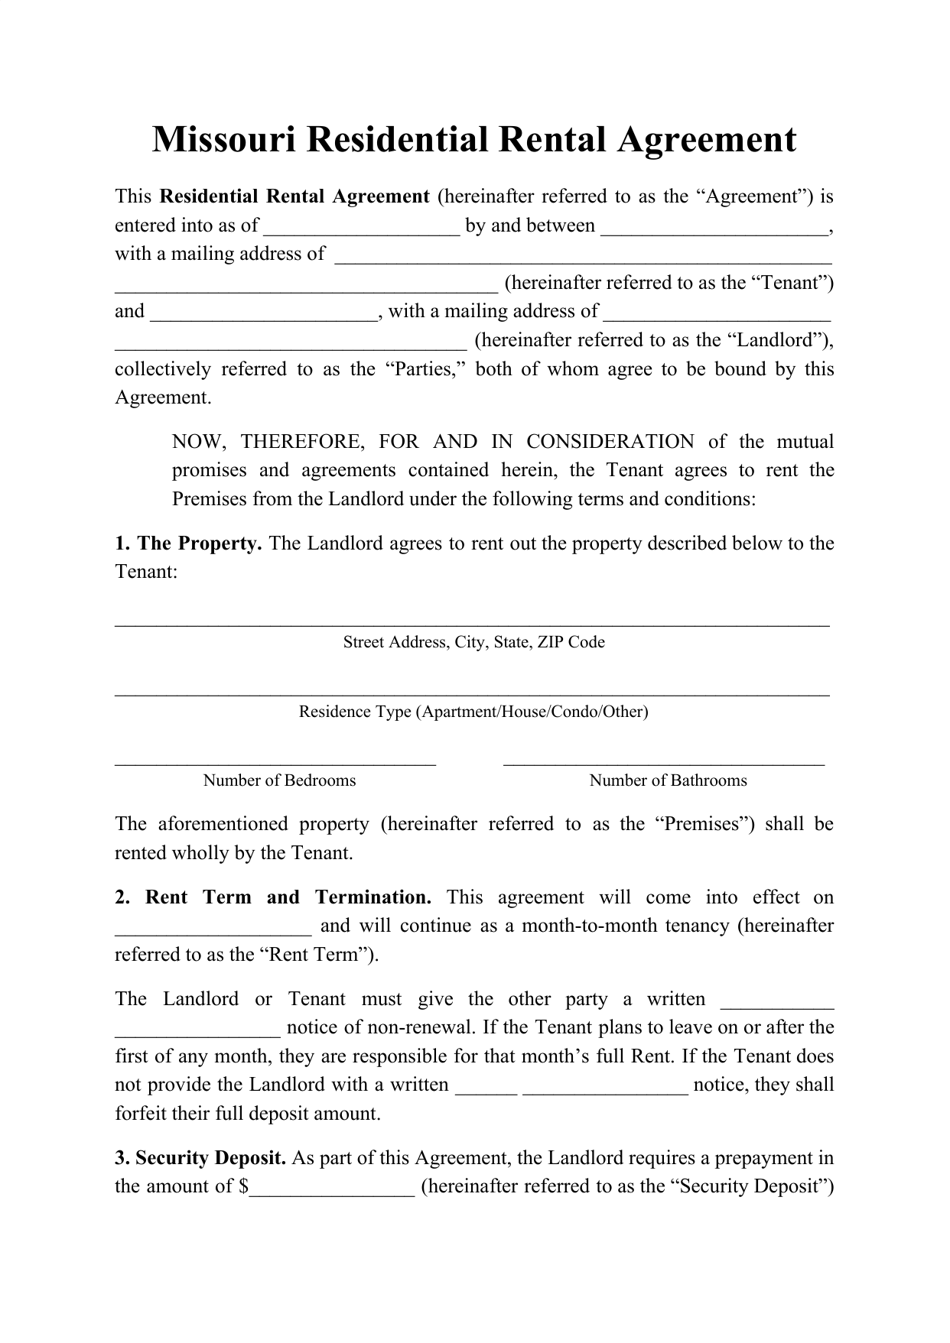 Residential Rental Agreement Template - Missouri, Page 1